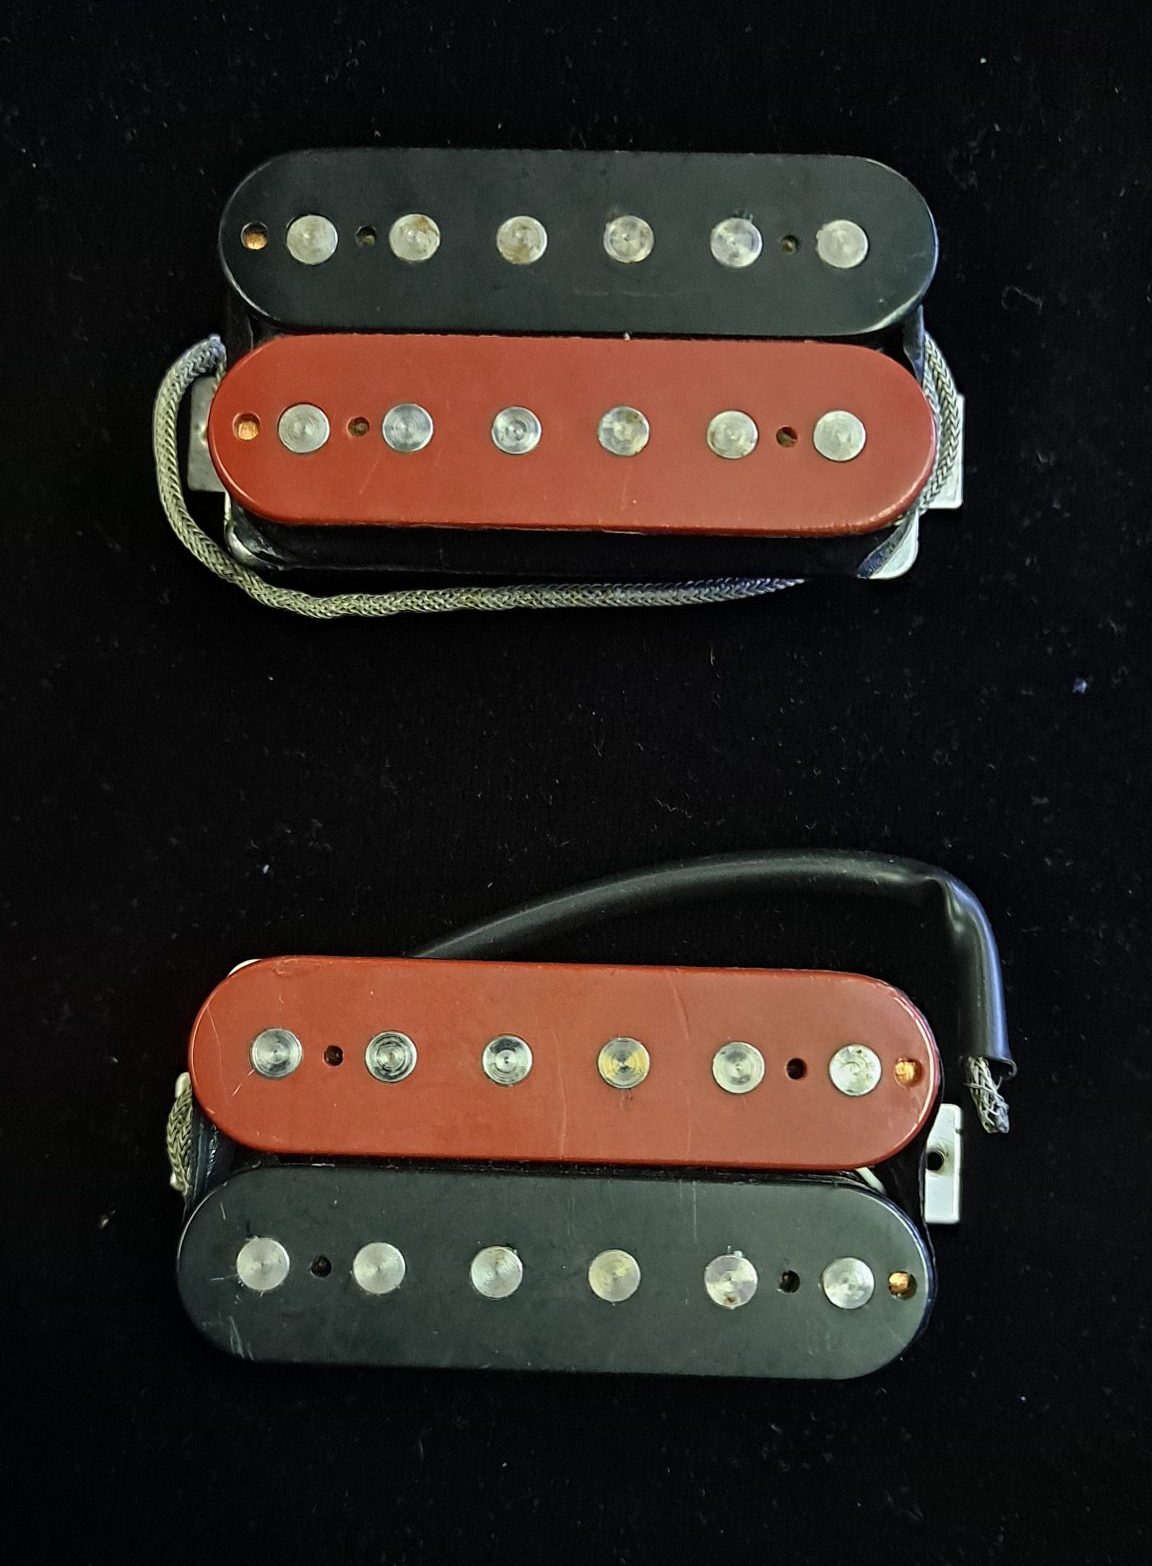 Used Red/Black set of Gibson 500t/496r pickups from a Gibson Voodoo